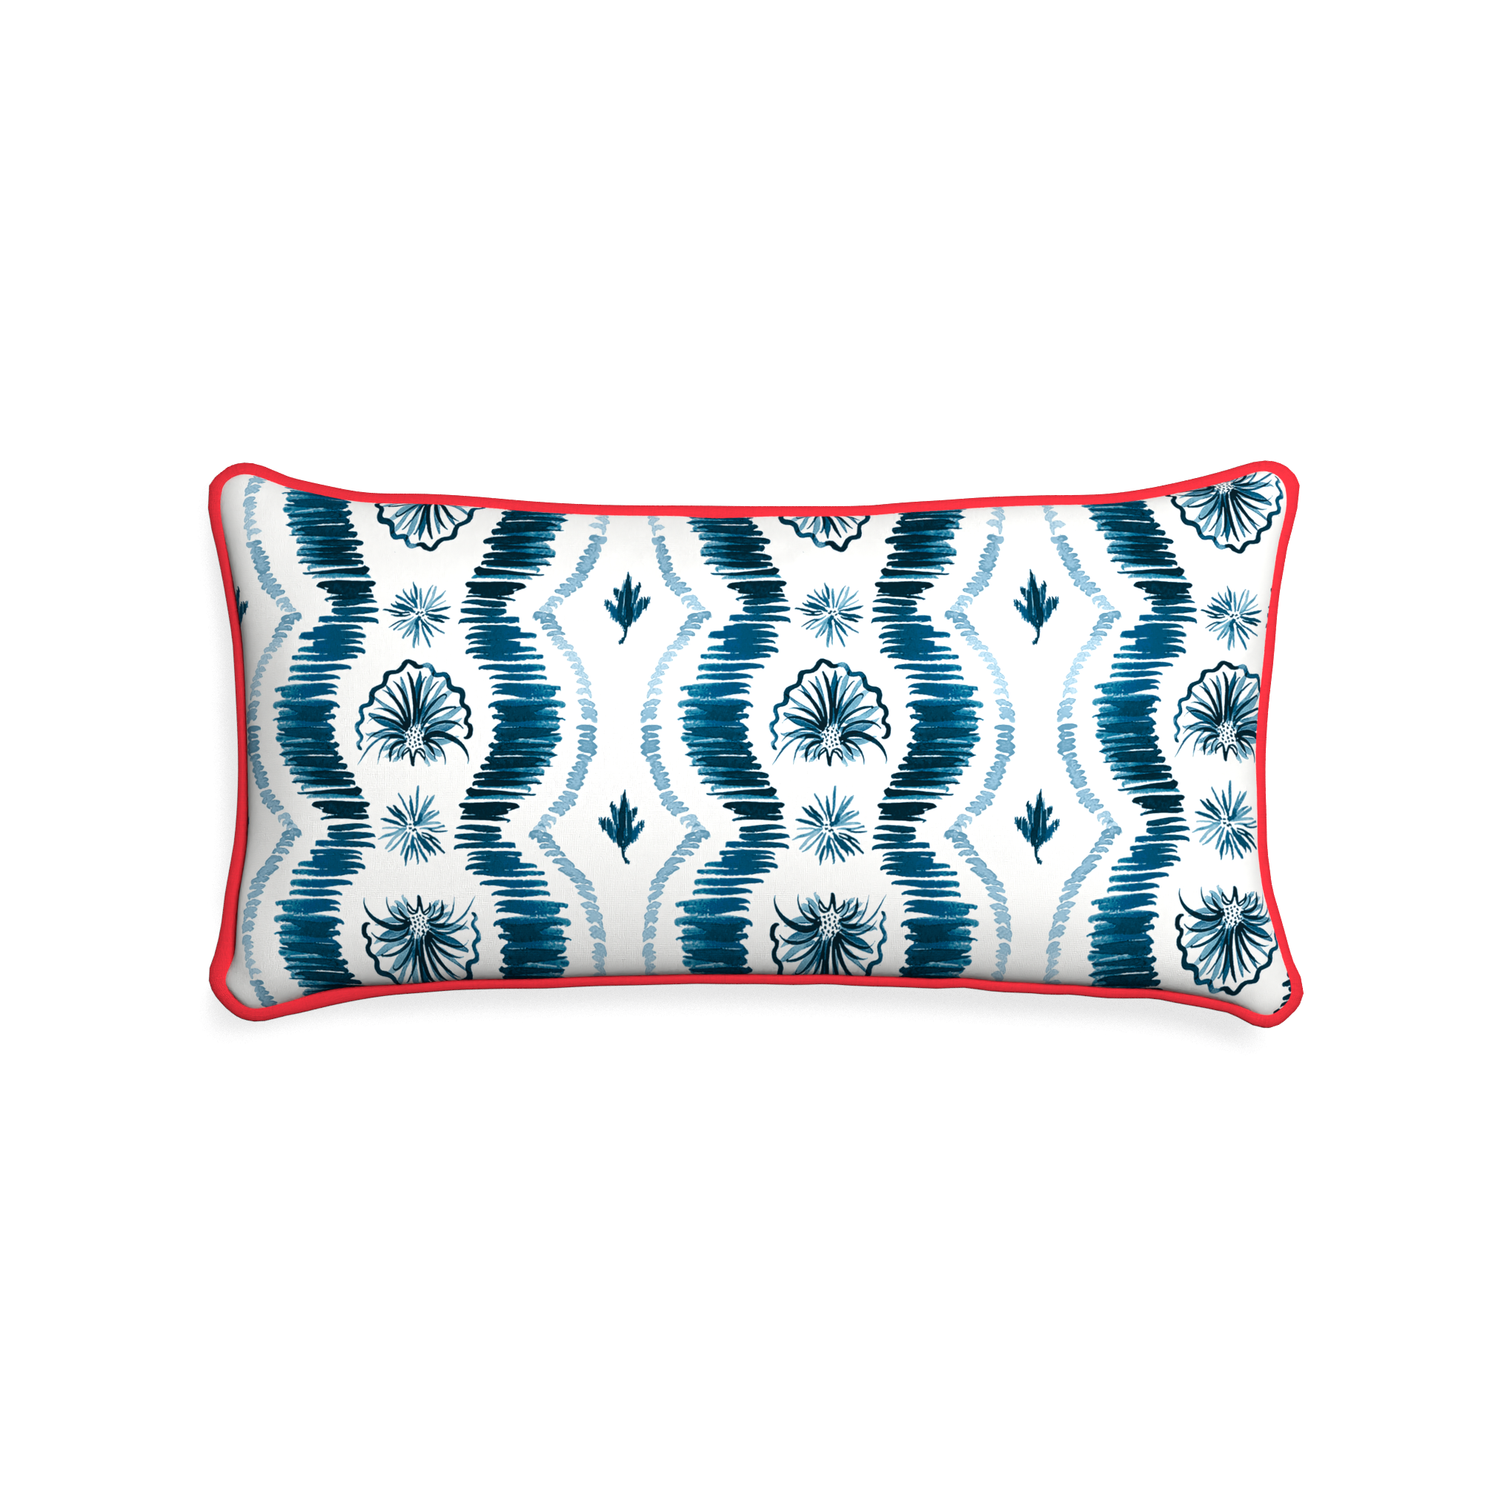 Midi-lumbar alice custom blue ikatpillow with cherry piping on white background